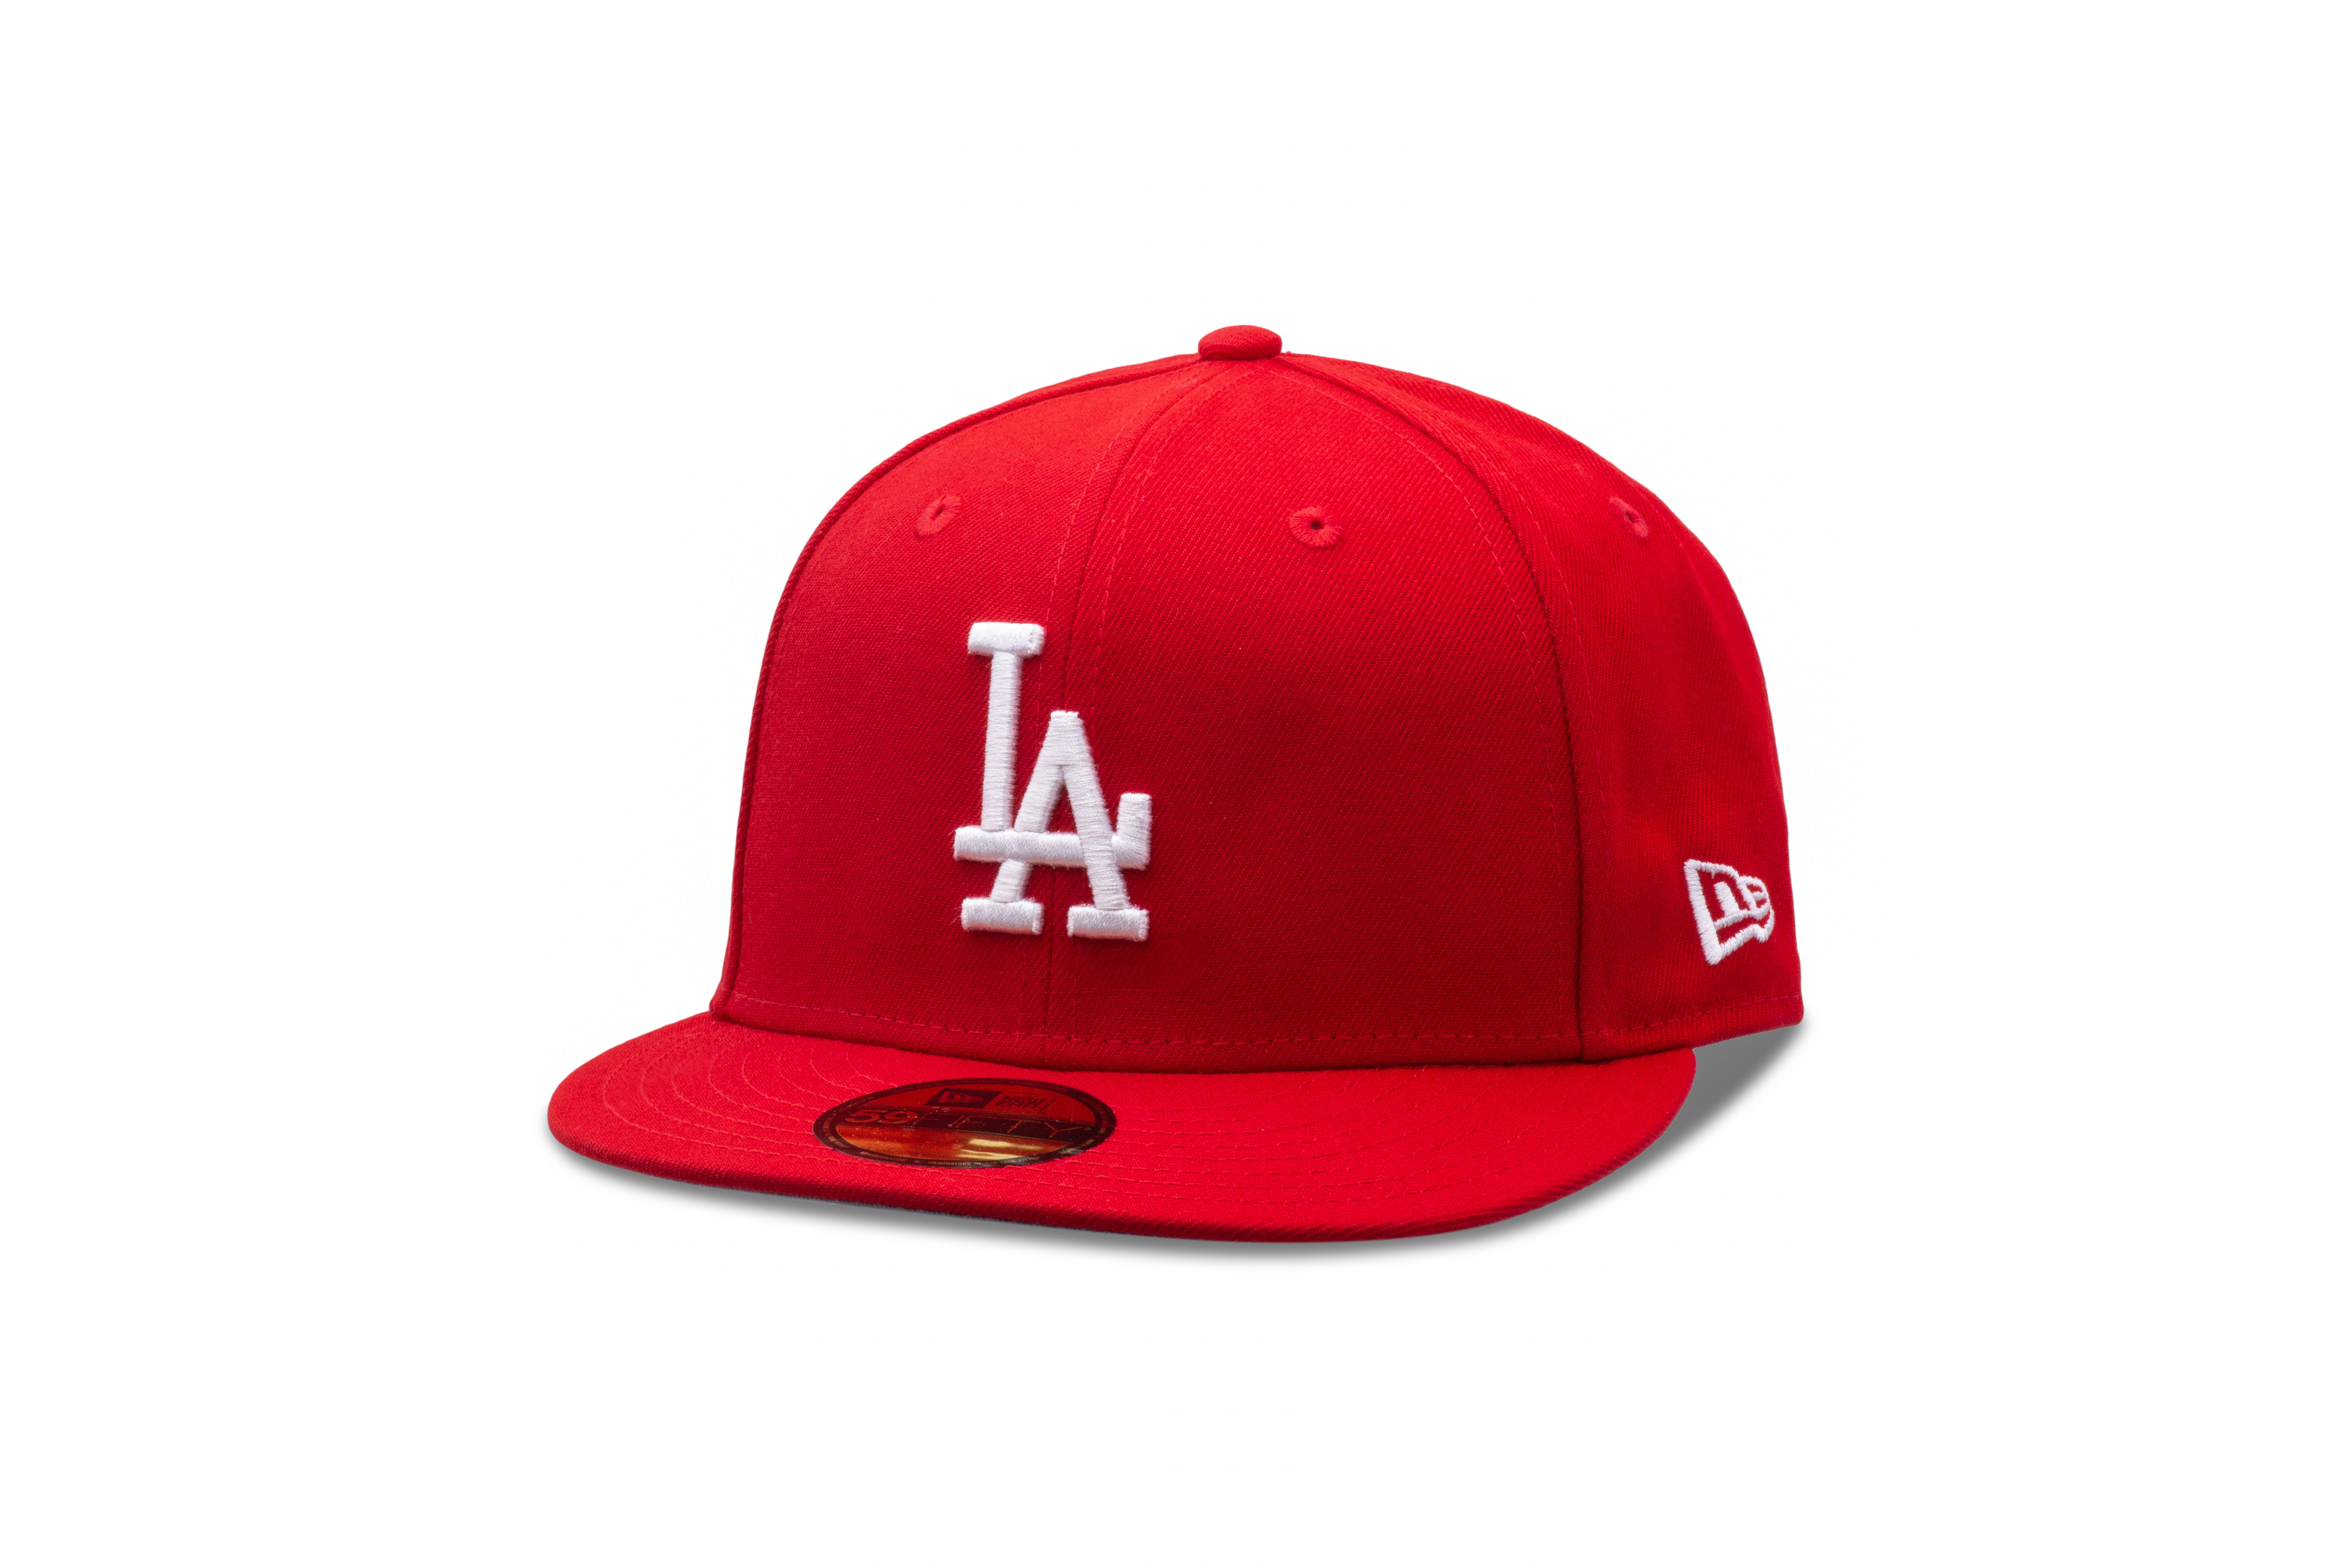 New Era MLB Basic Los Angeles Dodgers 59Fifty Fitted Baseball Cap - Scarlet Red - 7 1/4